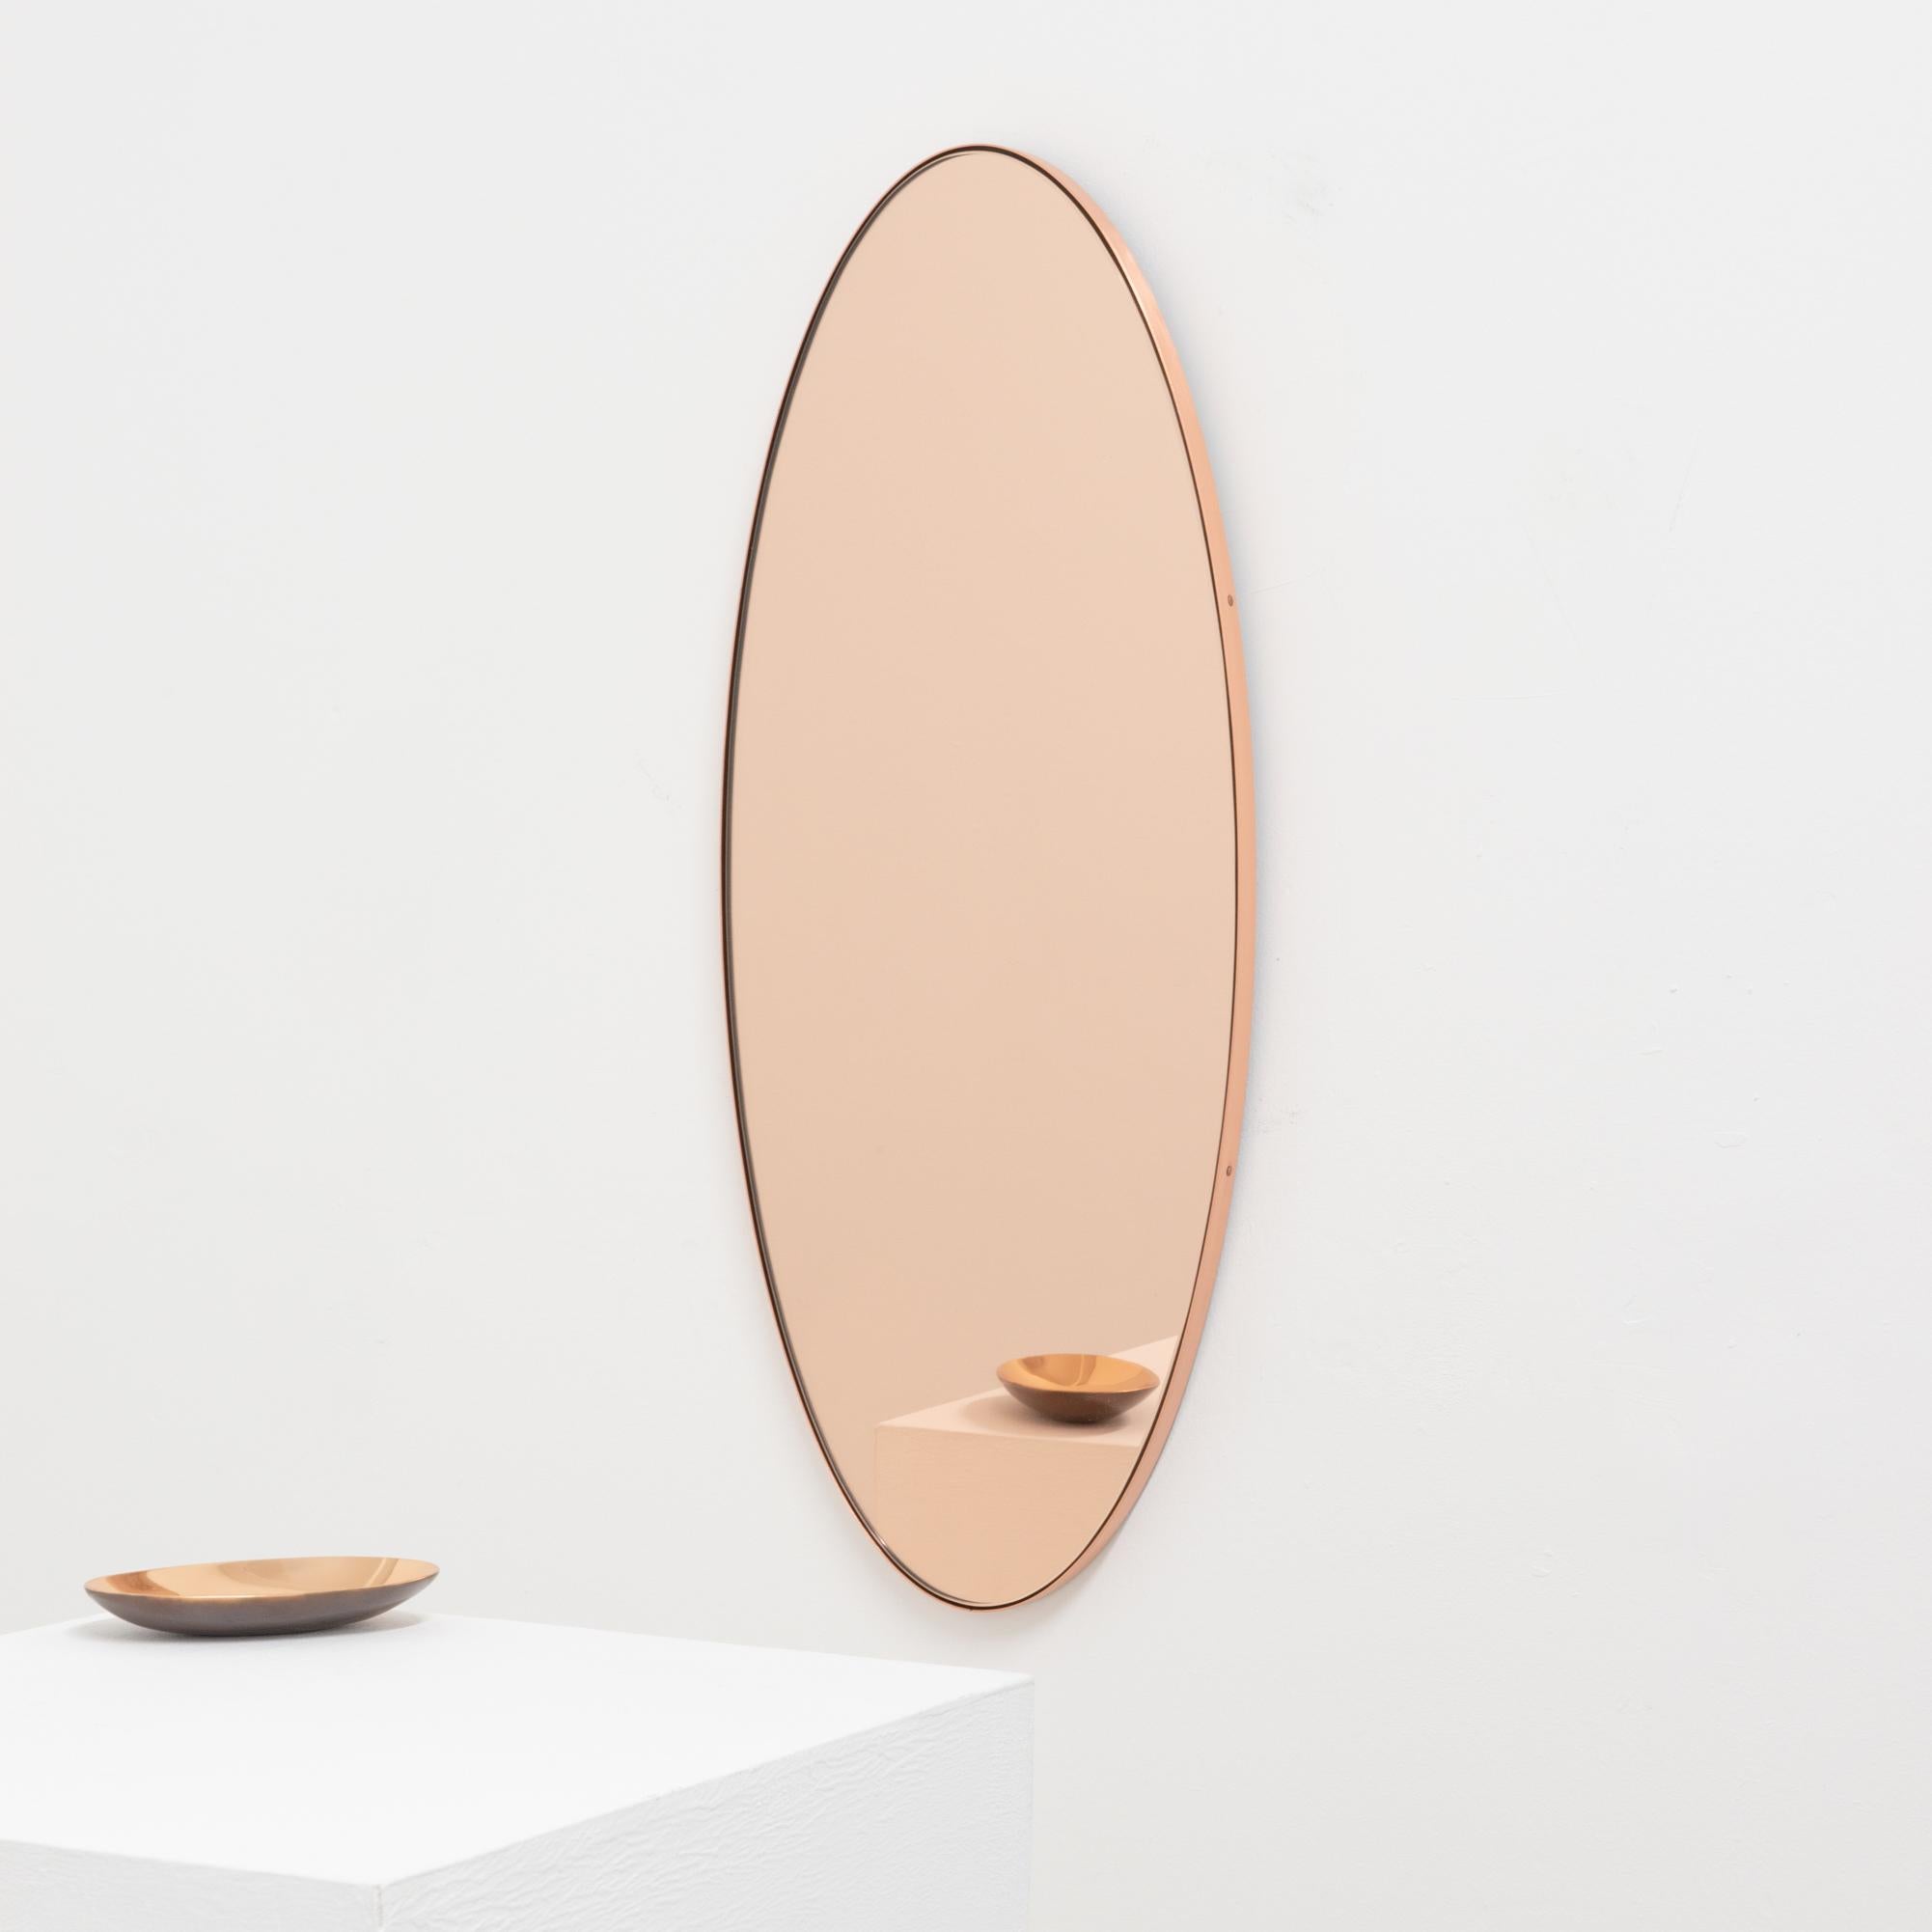 Ovalis Oval shaped Rose Gold Contemporary Mirror with a Copper Frame, Medium For Sale 1